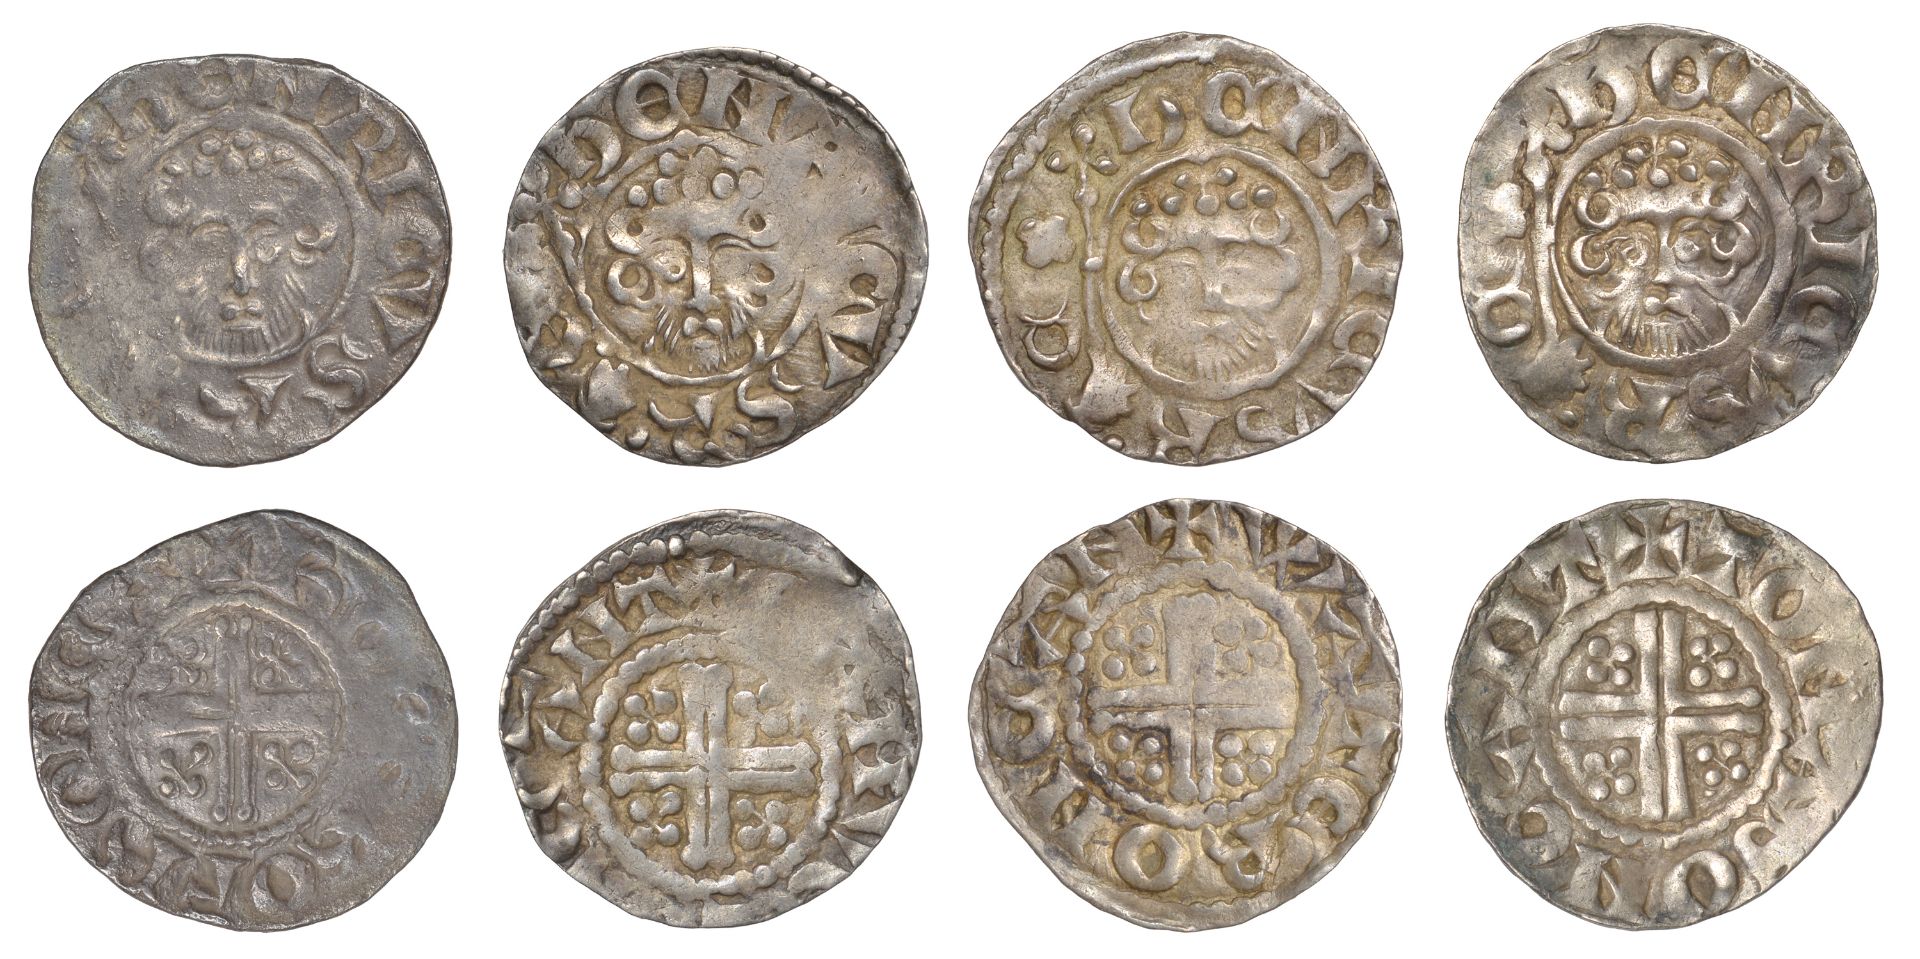 Henry III (1216-1272), Pennies (4), all class VIIa2, Canterbury, Roger of R, roger of r on c...